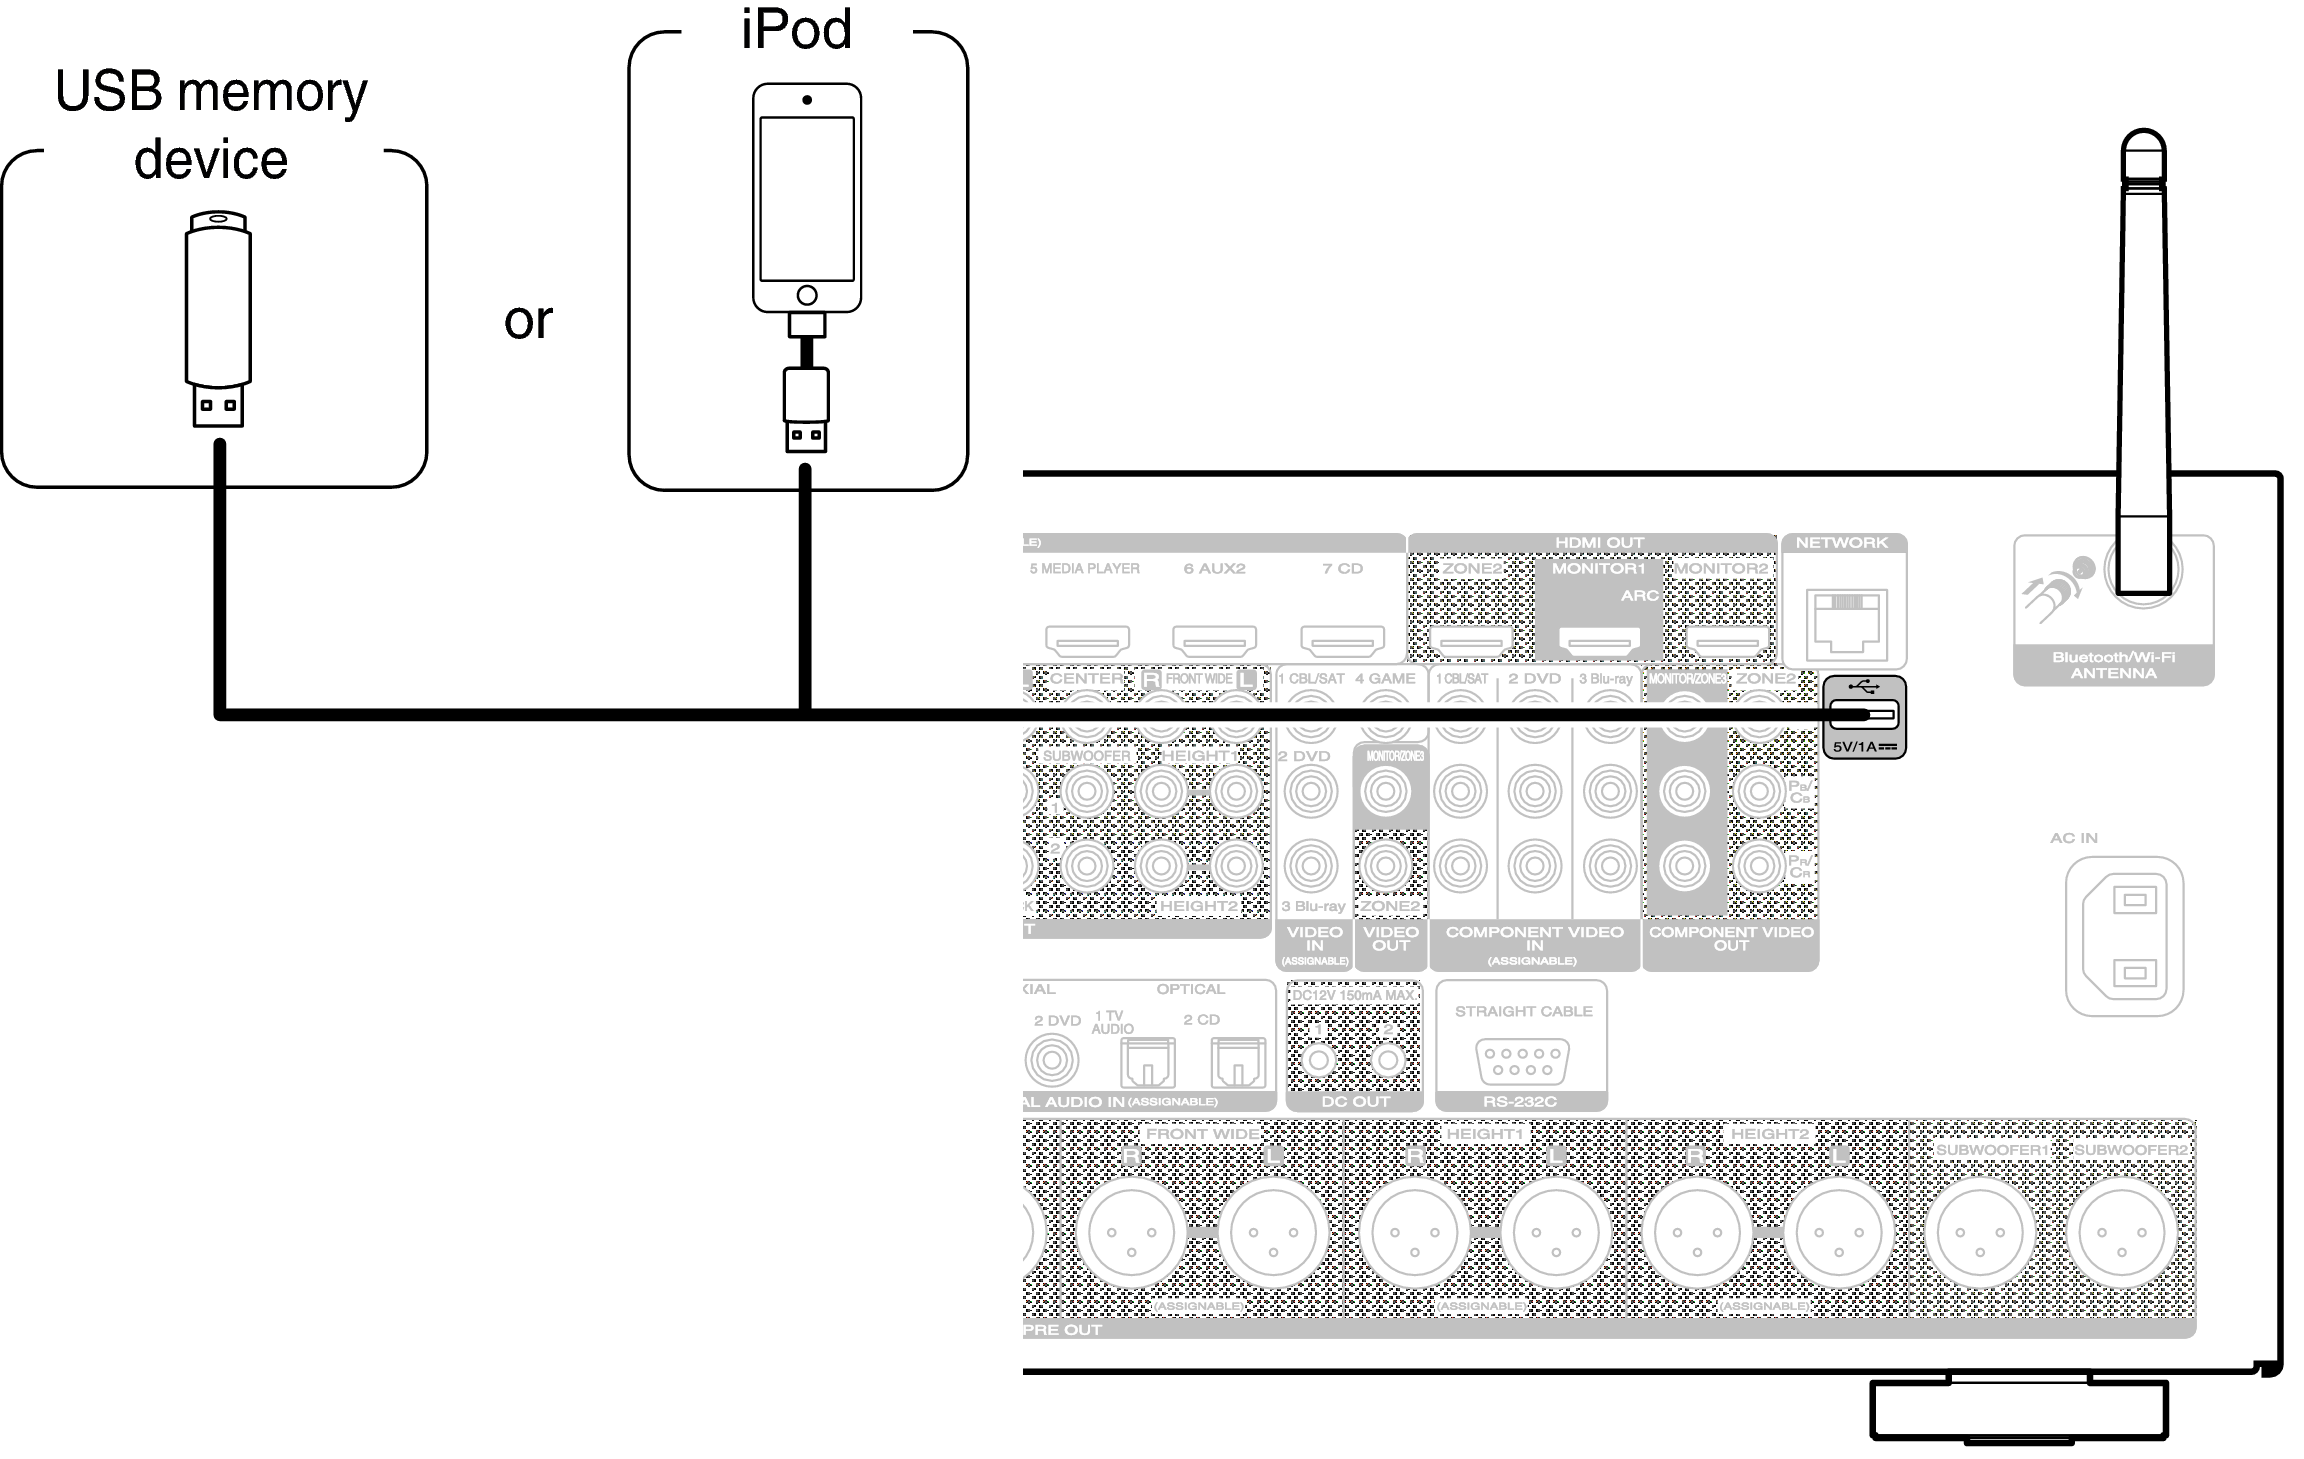 Connecting an iPod or USB memory device to the USB port AV8802A